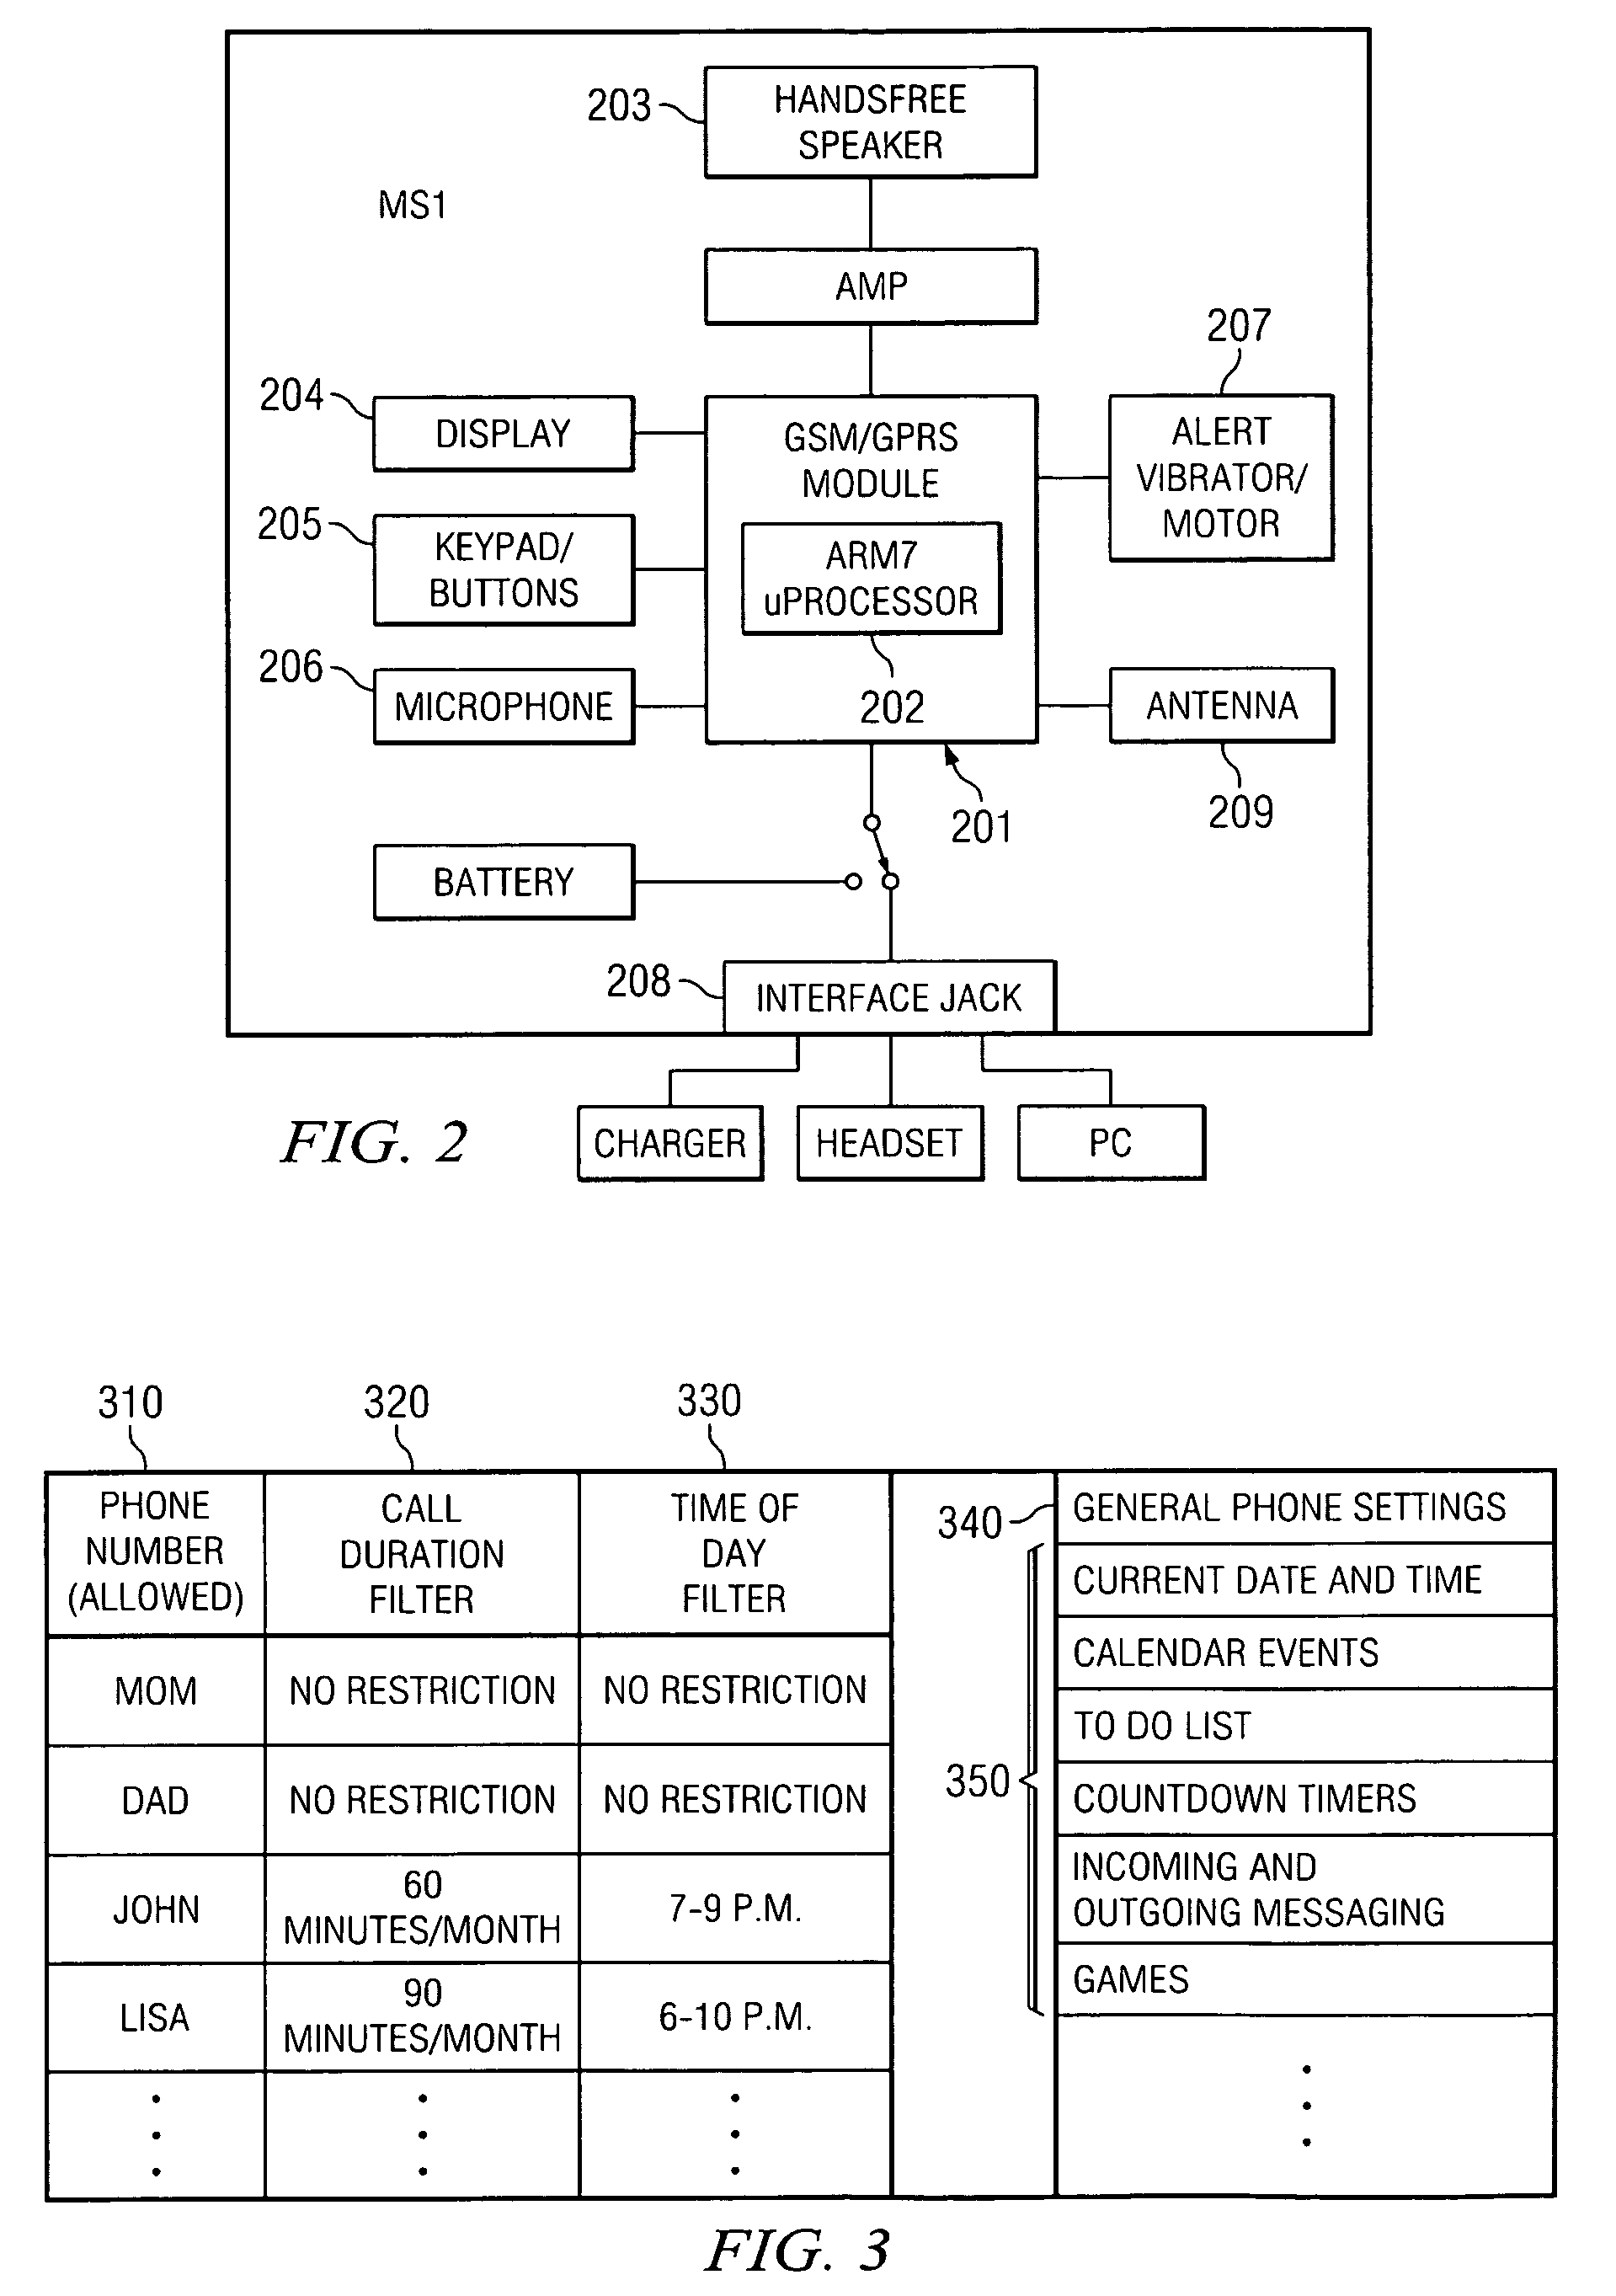 Controlling the use of a wireless mobile communication device